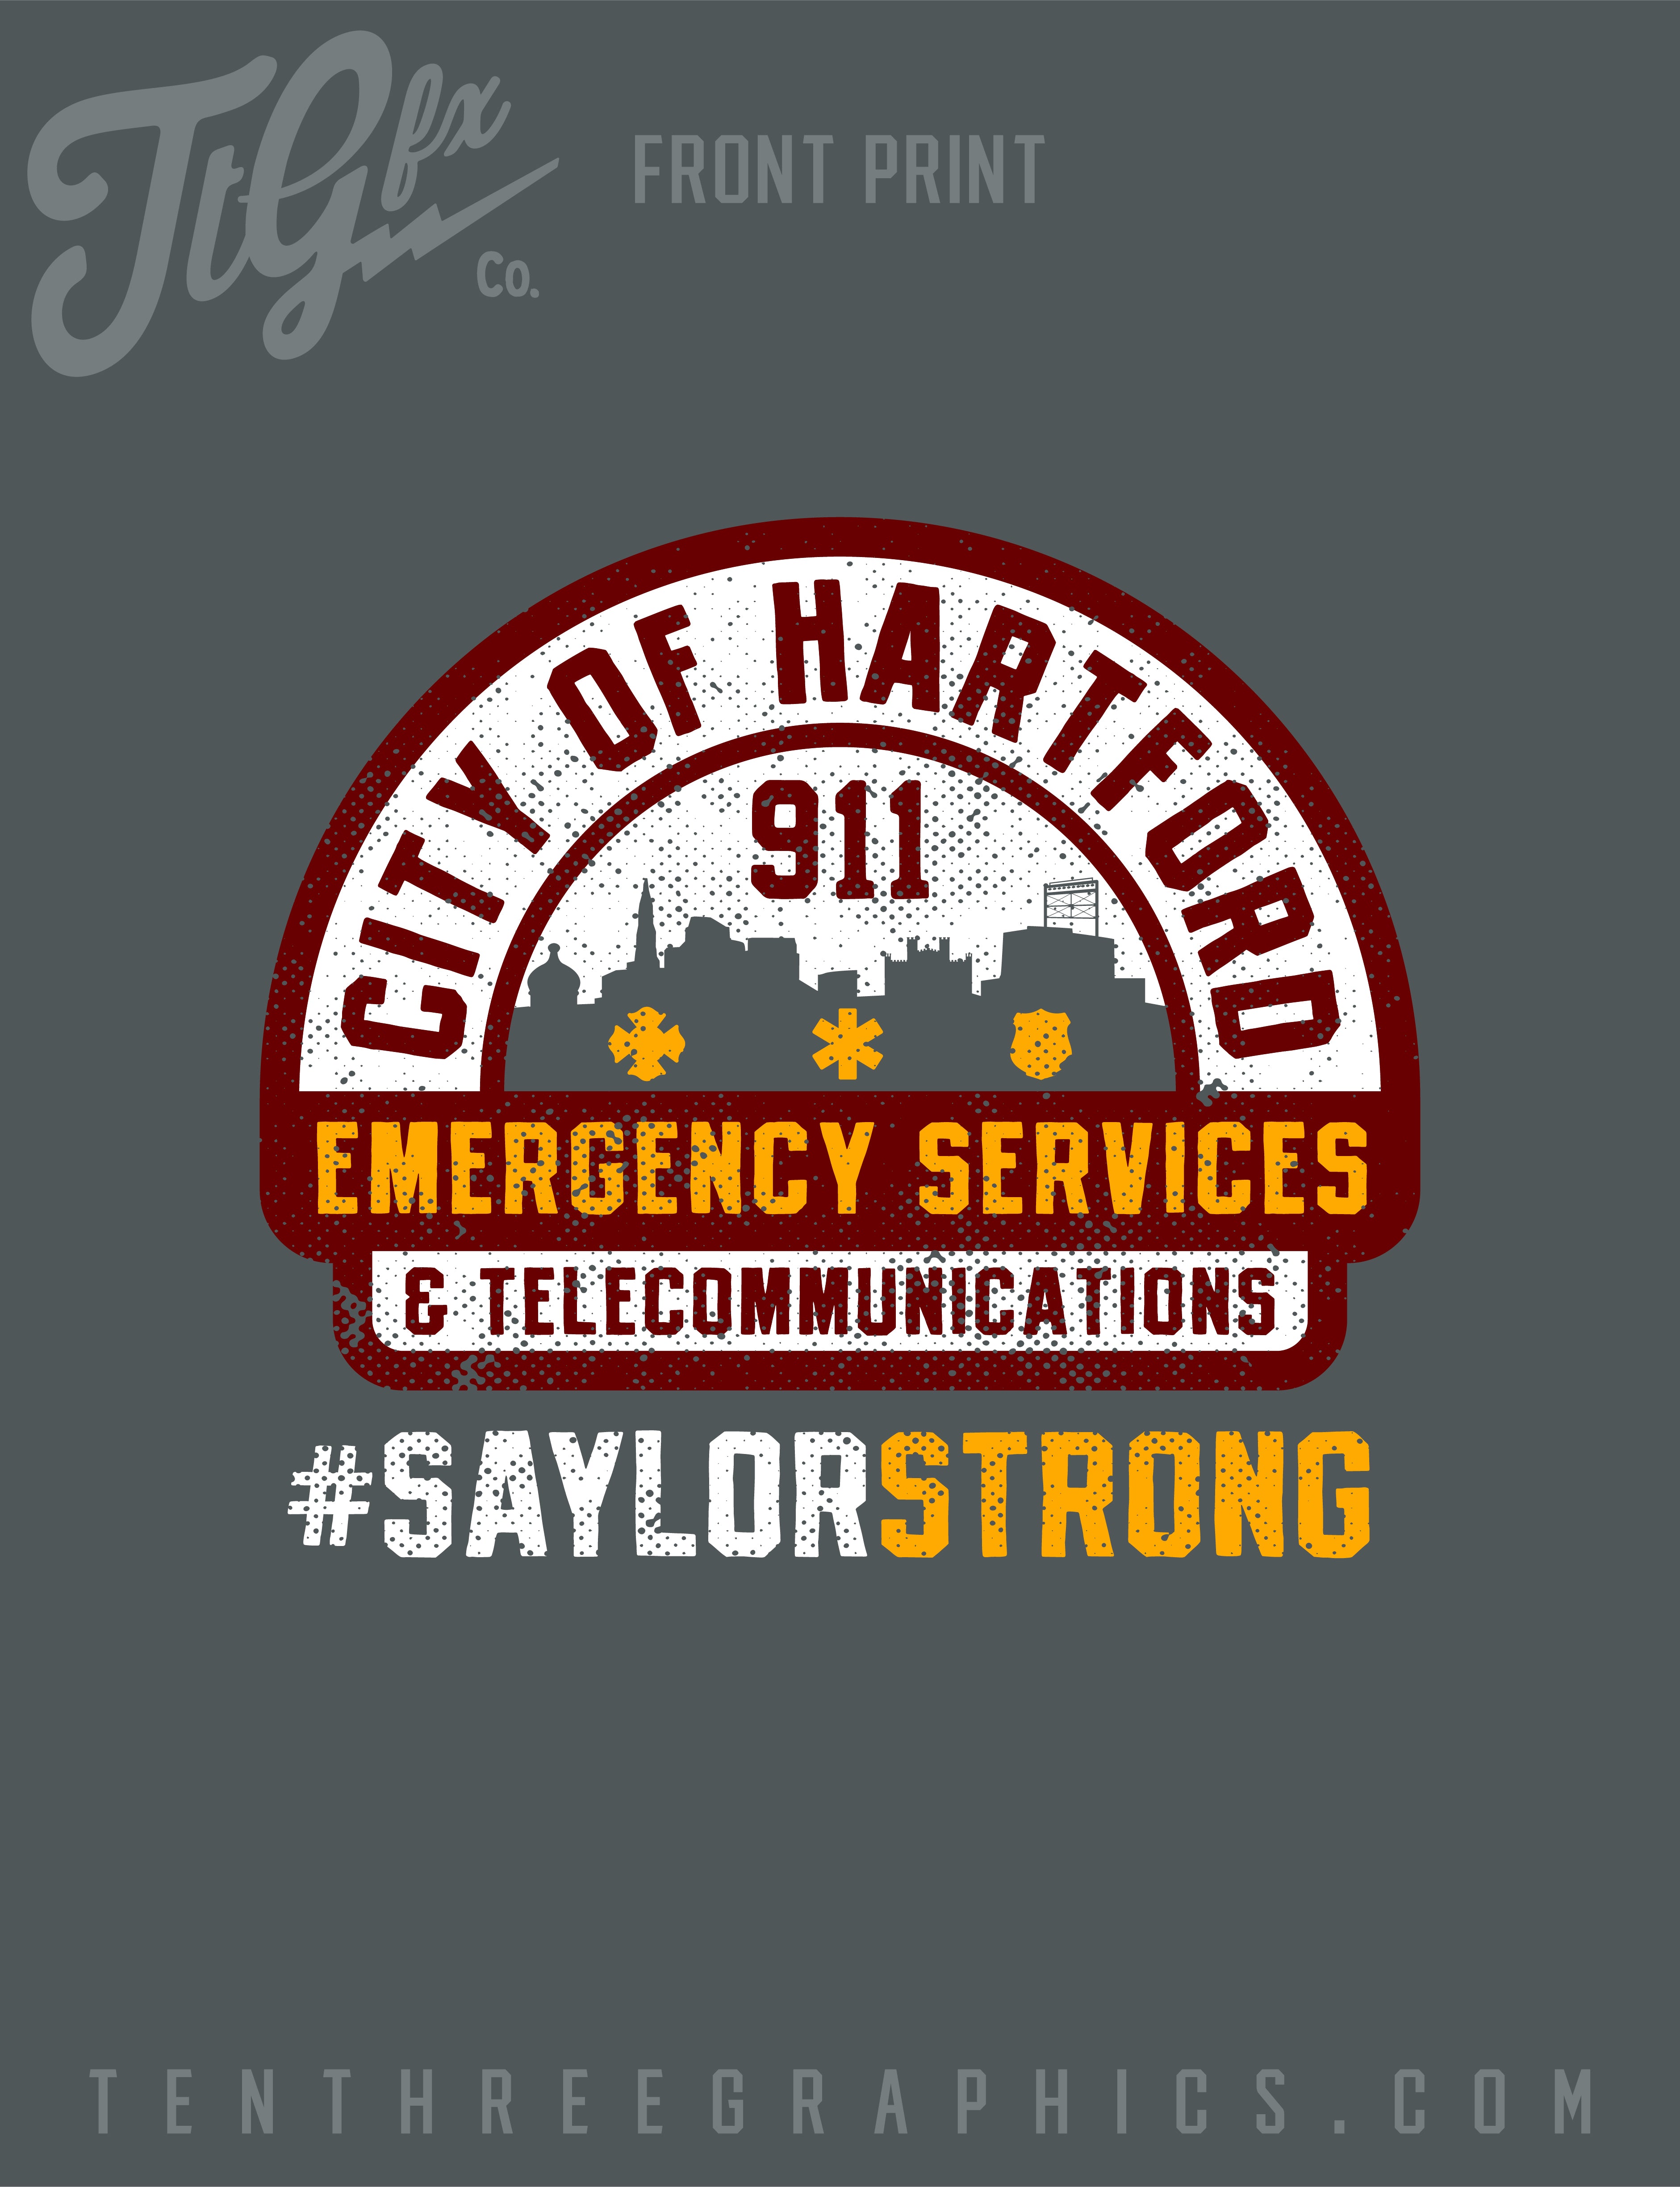 Hartford Dispatchers &quot;SAYLOR STRONG&quot; Support Tee